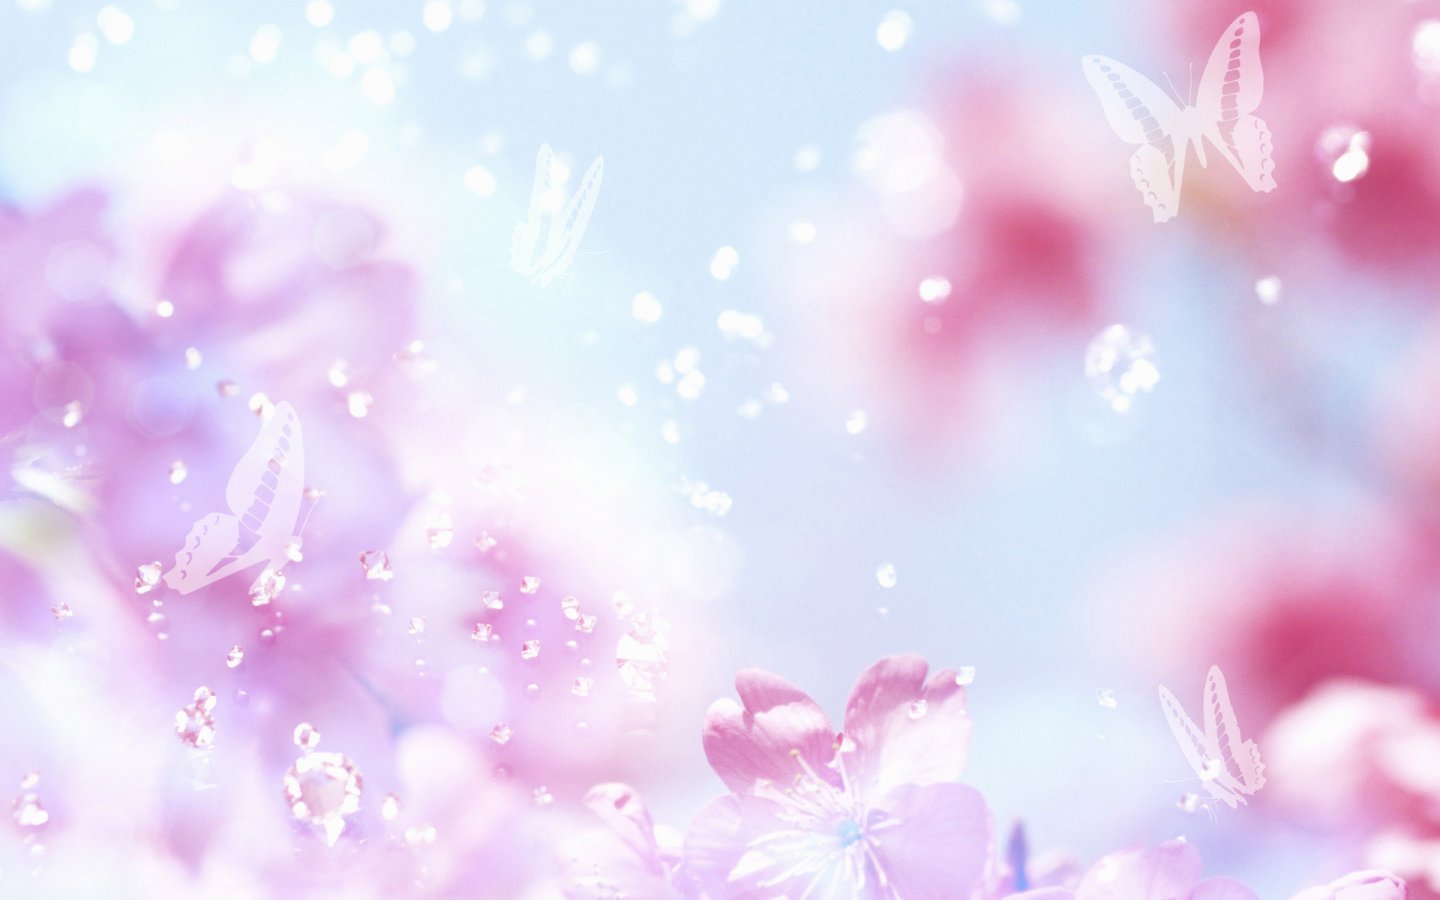 Beautiful flowers background 1440x900 Wallpapers 1440x900 Wallpapers 1440x900